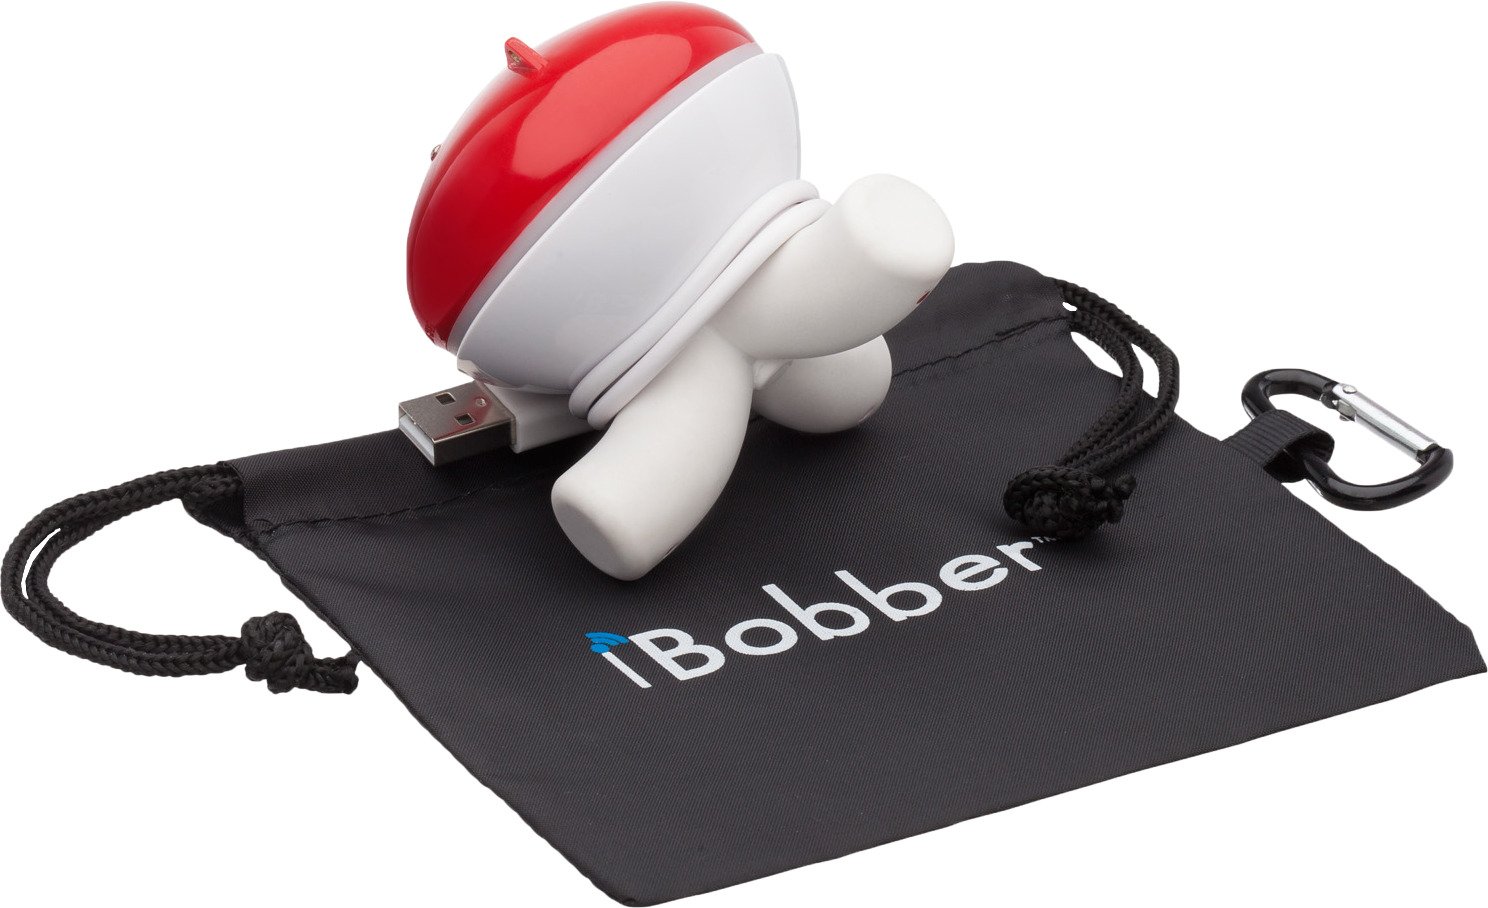 iBobber Portable Wireless Bluetooth Fish Finder Depth Finder with Depth  Range of 135 feet 10+ hrs Battery Life with iOS & Android App Wireless and